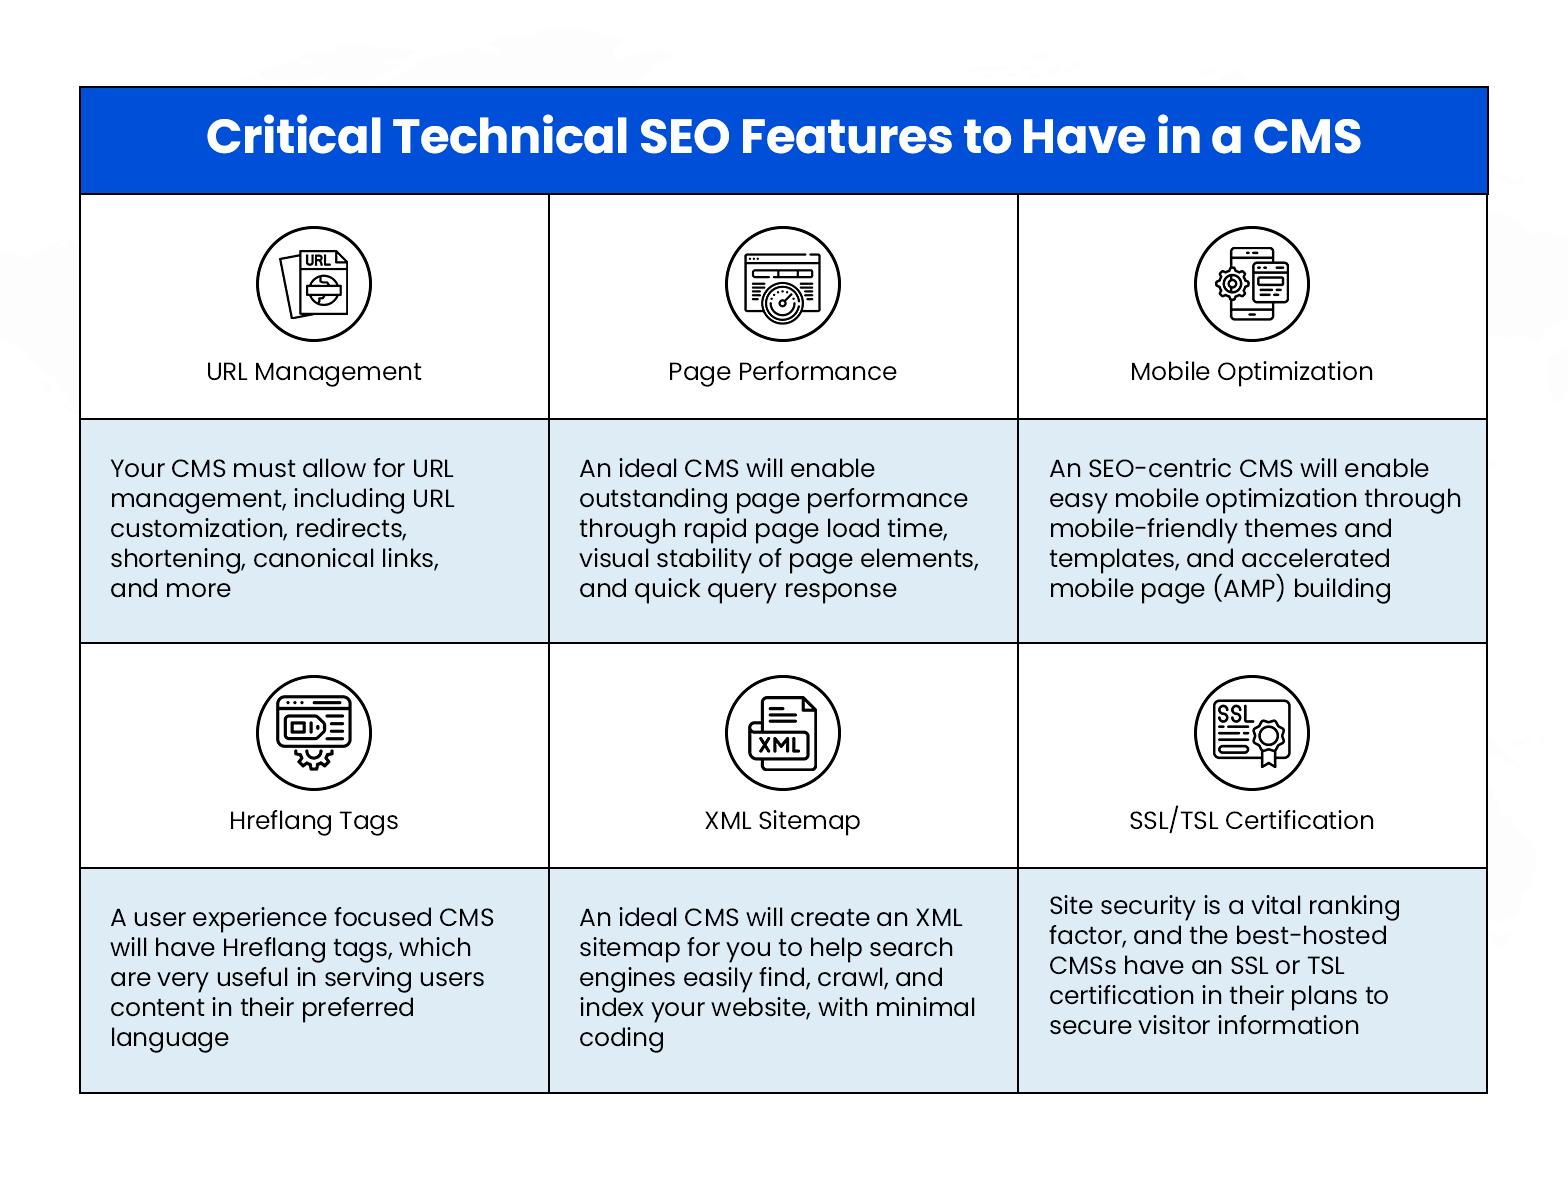 Critical Technical SEO Features to Have in a CMS